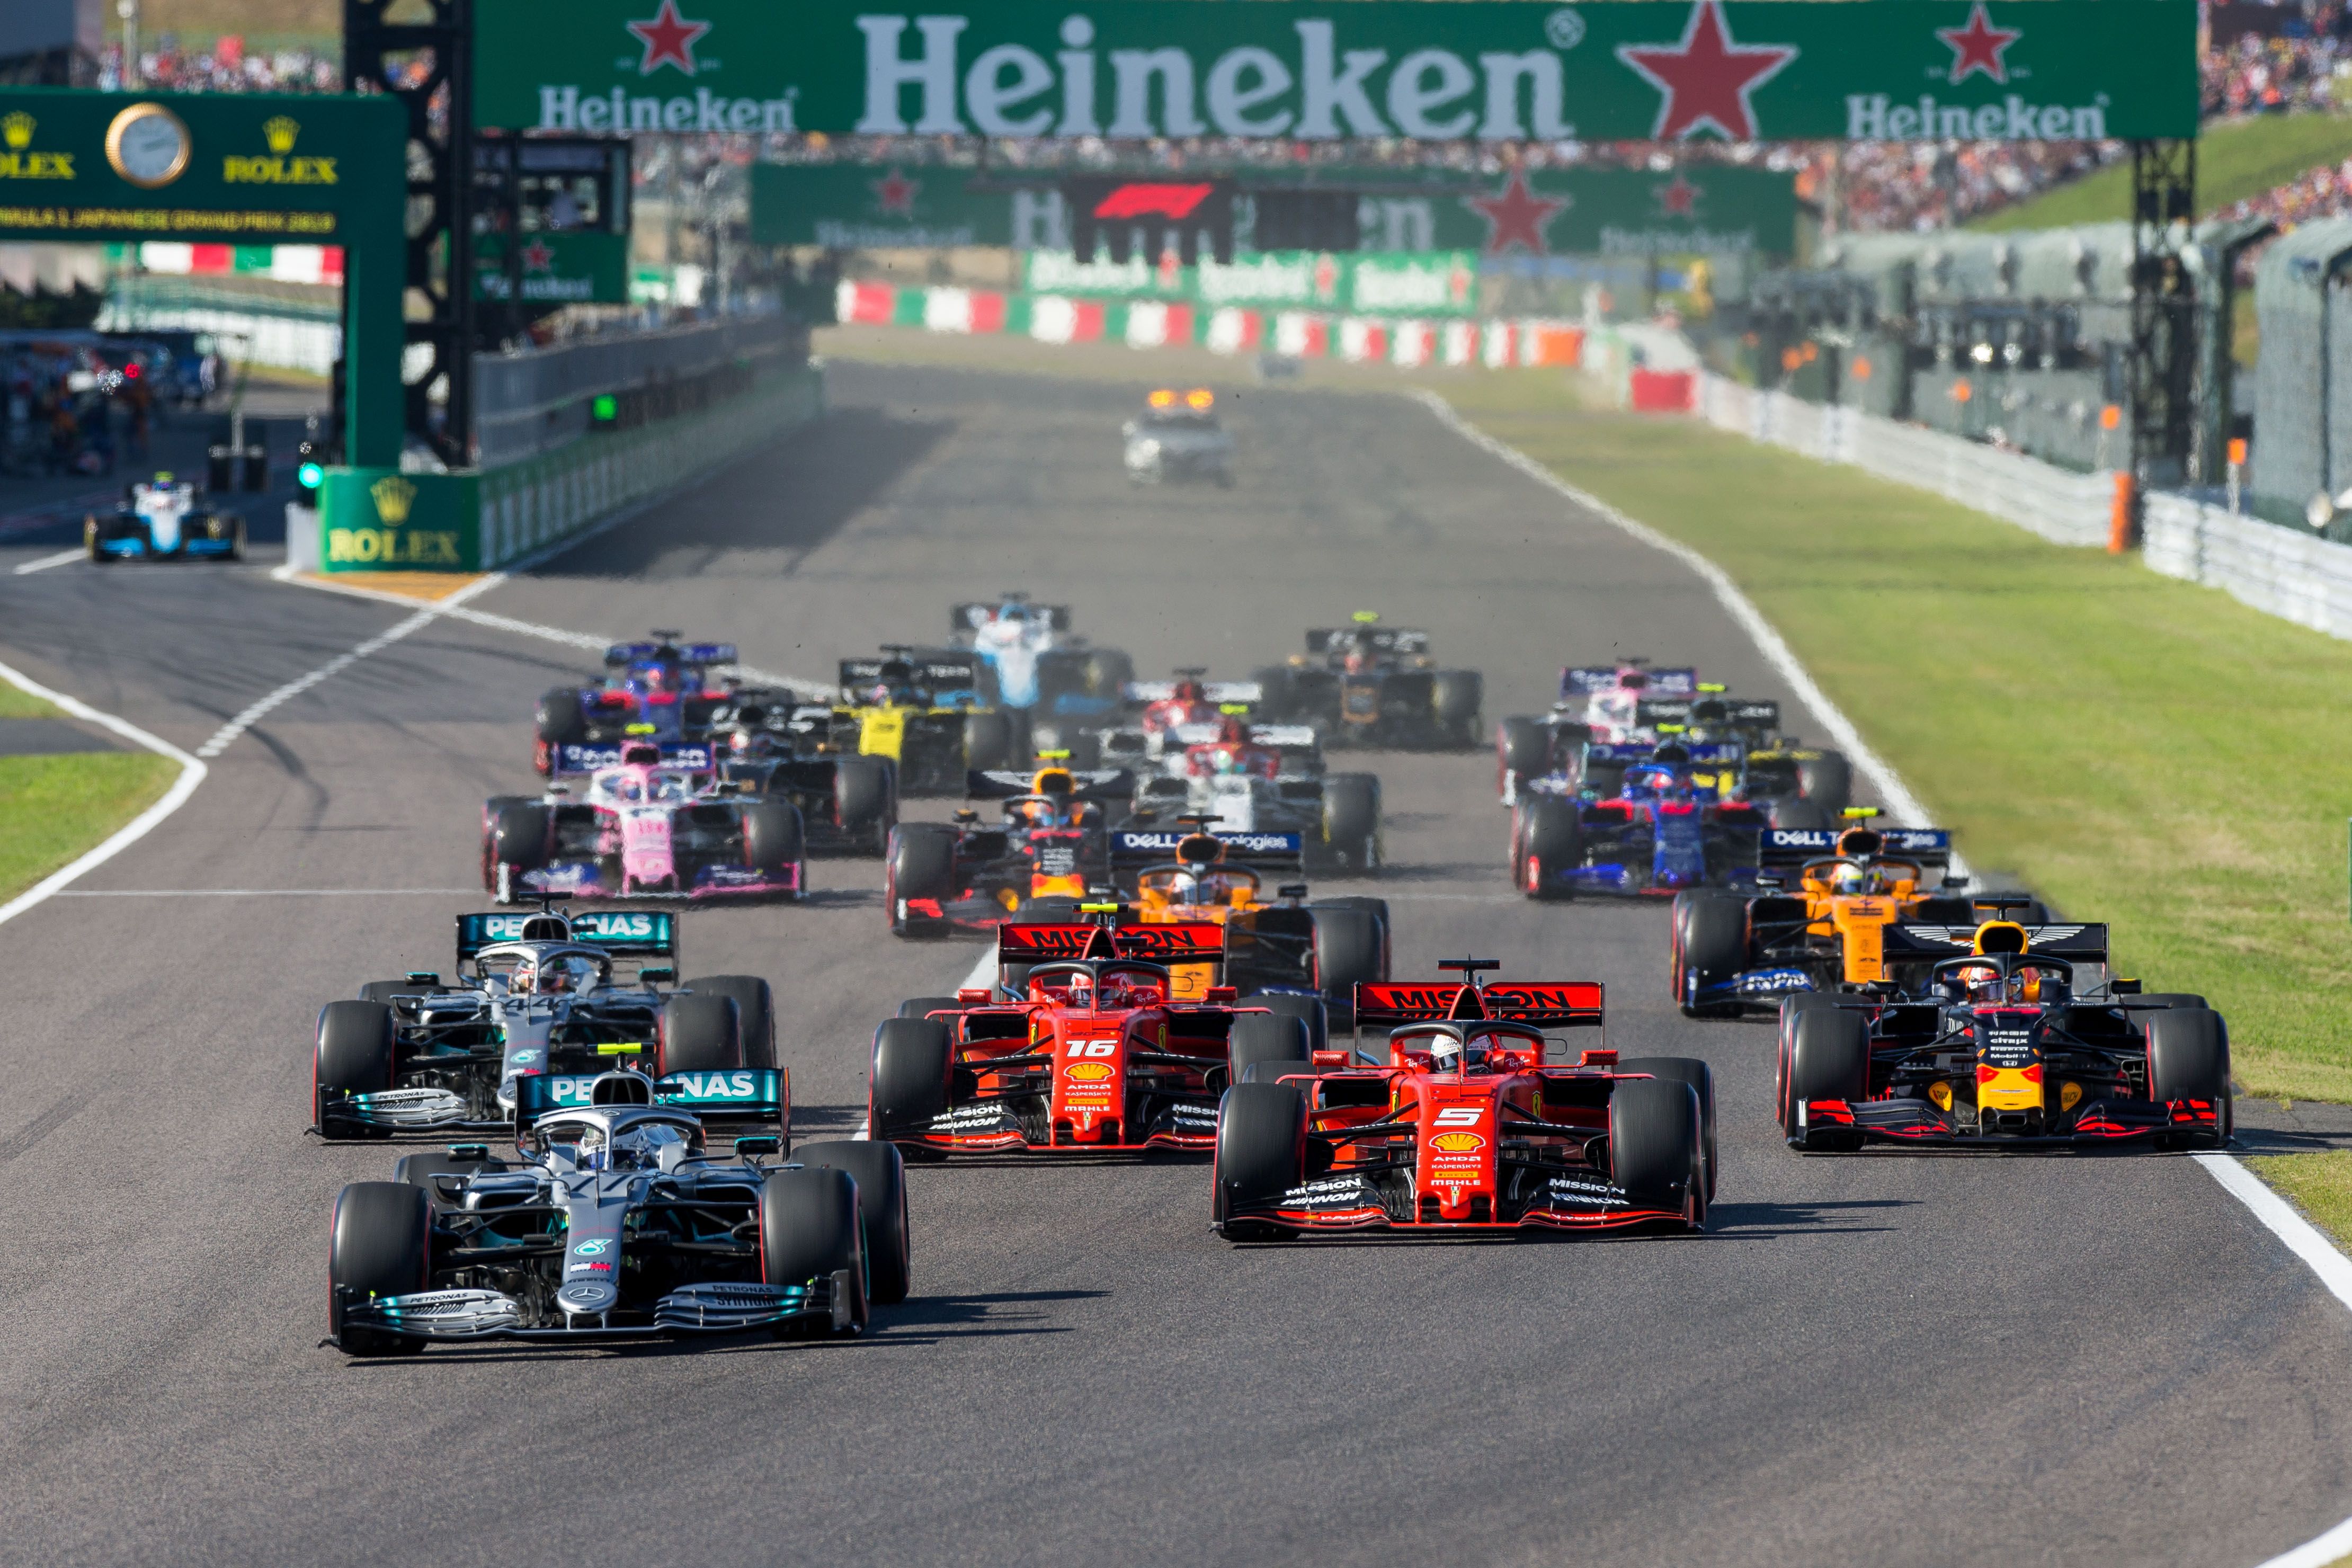 2021 Japanese Grand Prix Has Been Canceled Over COVID-19 Concerns